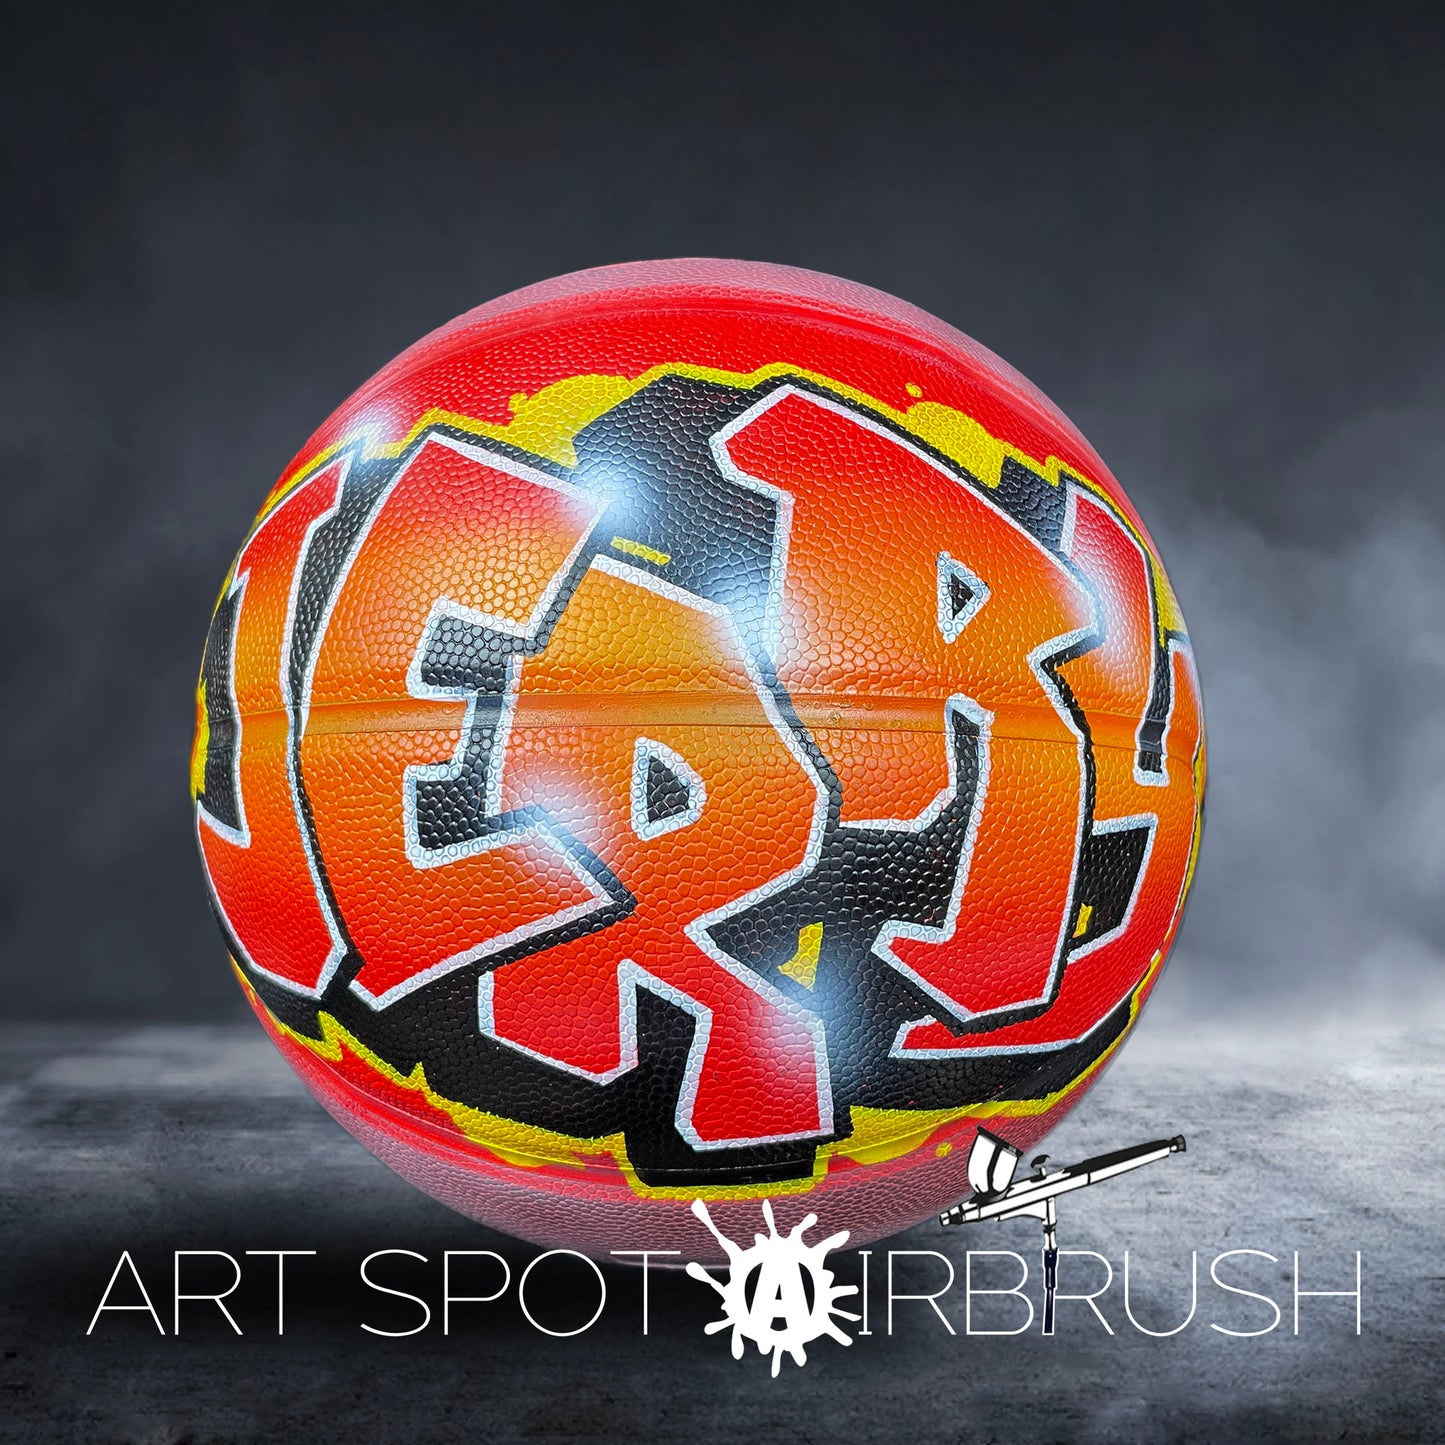 Personalized Basketball with a Name Painted in Custom Airbrush Graffiti